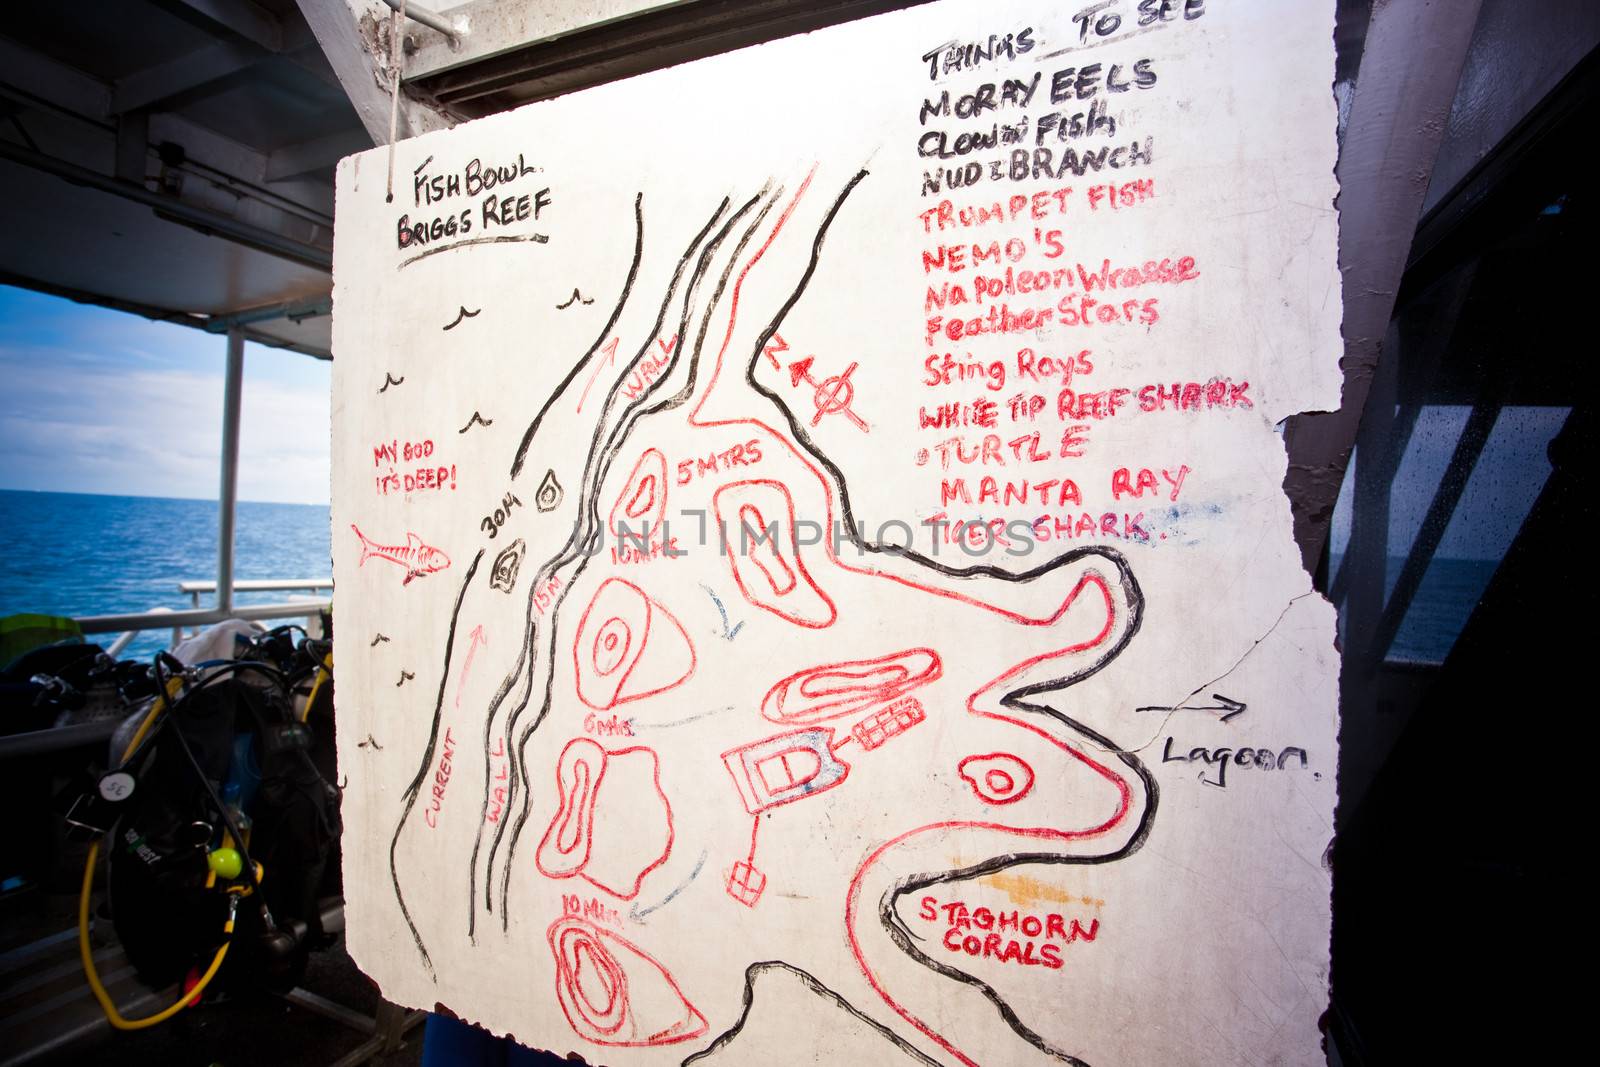 Pictogram of the Great Barrier Reef on a dive ship marking out areas of interest for divers before they enter the water